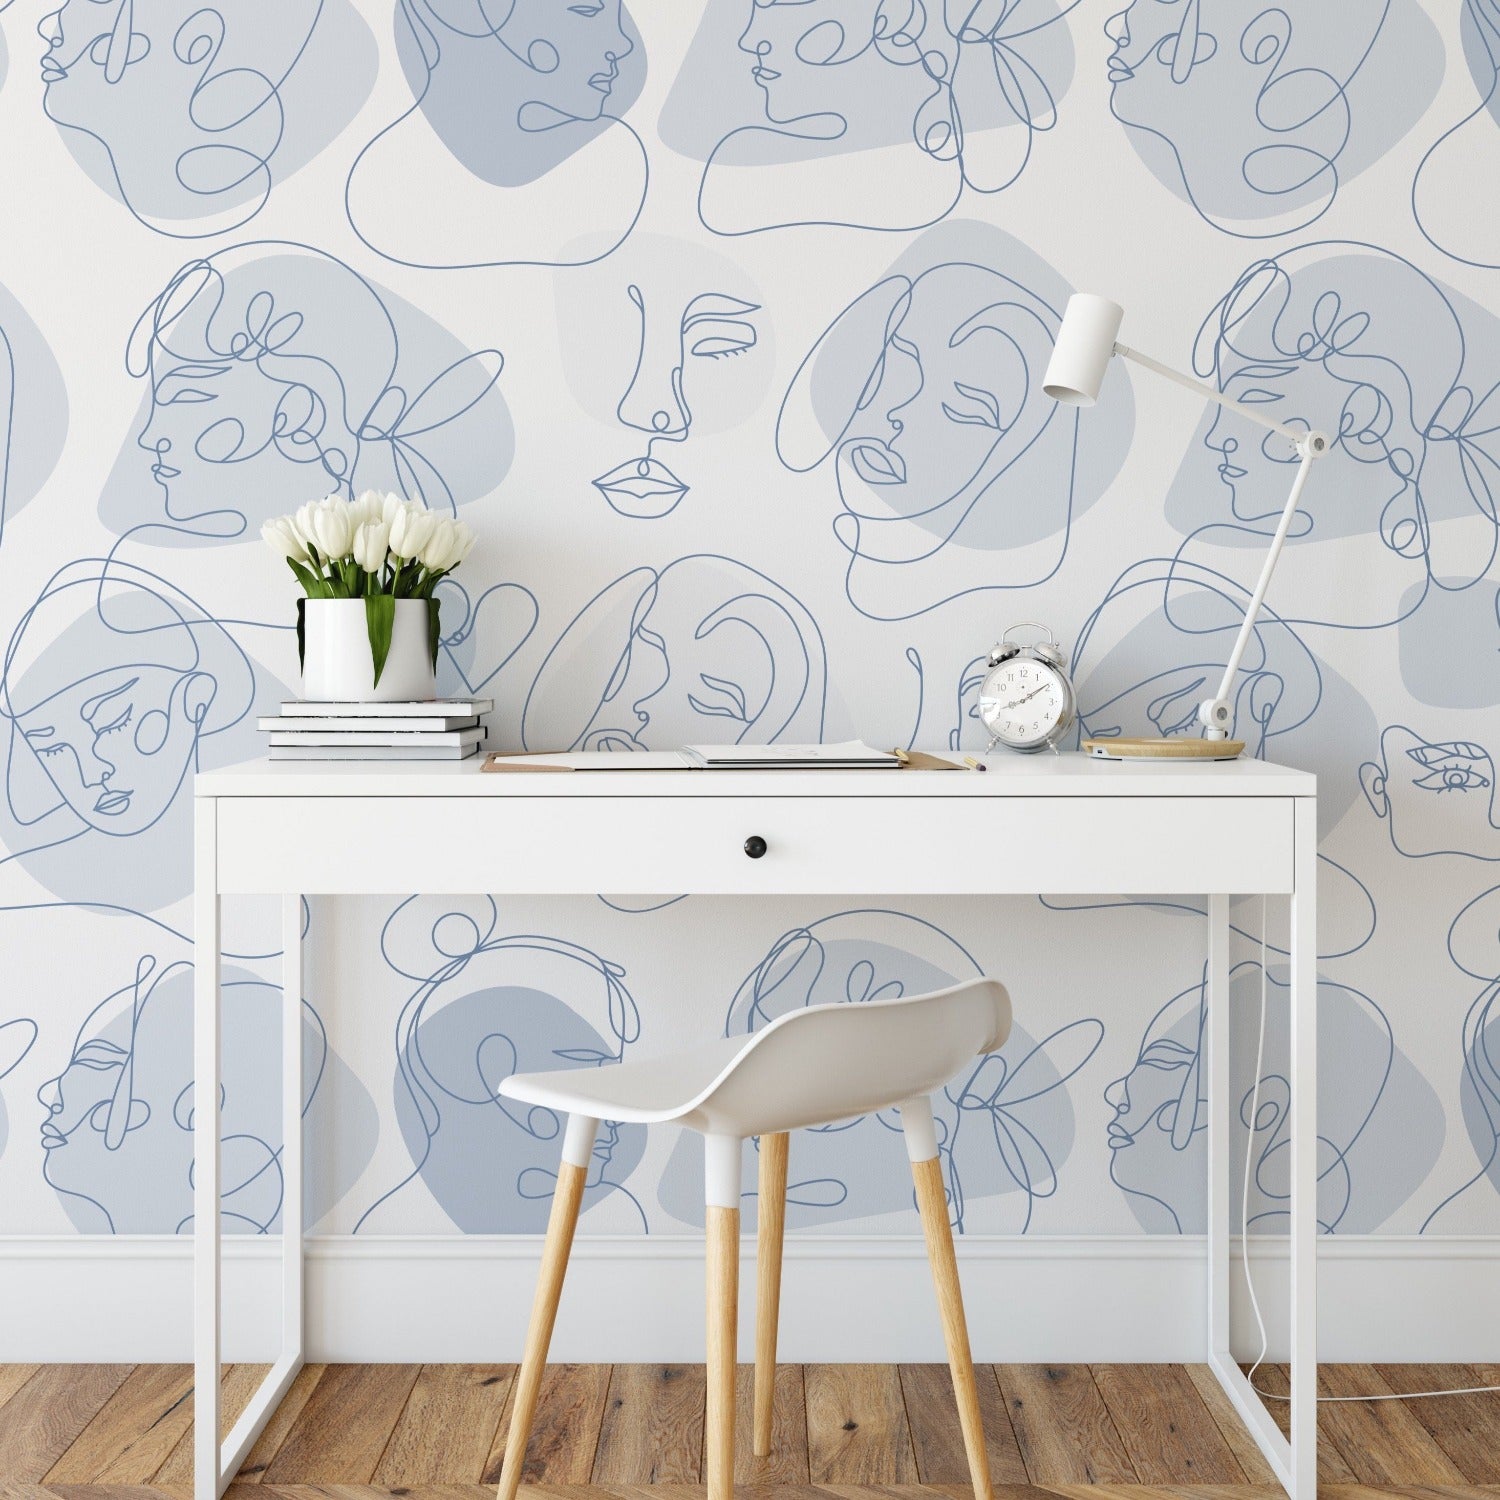 Another room setup featuring the abstract line art faces wallpaper. The design adds an artistic touch to a simple office space with a white desk, a modern chair, and minimal decorations, highlighting how the wallpaper can transform a working environment.